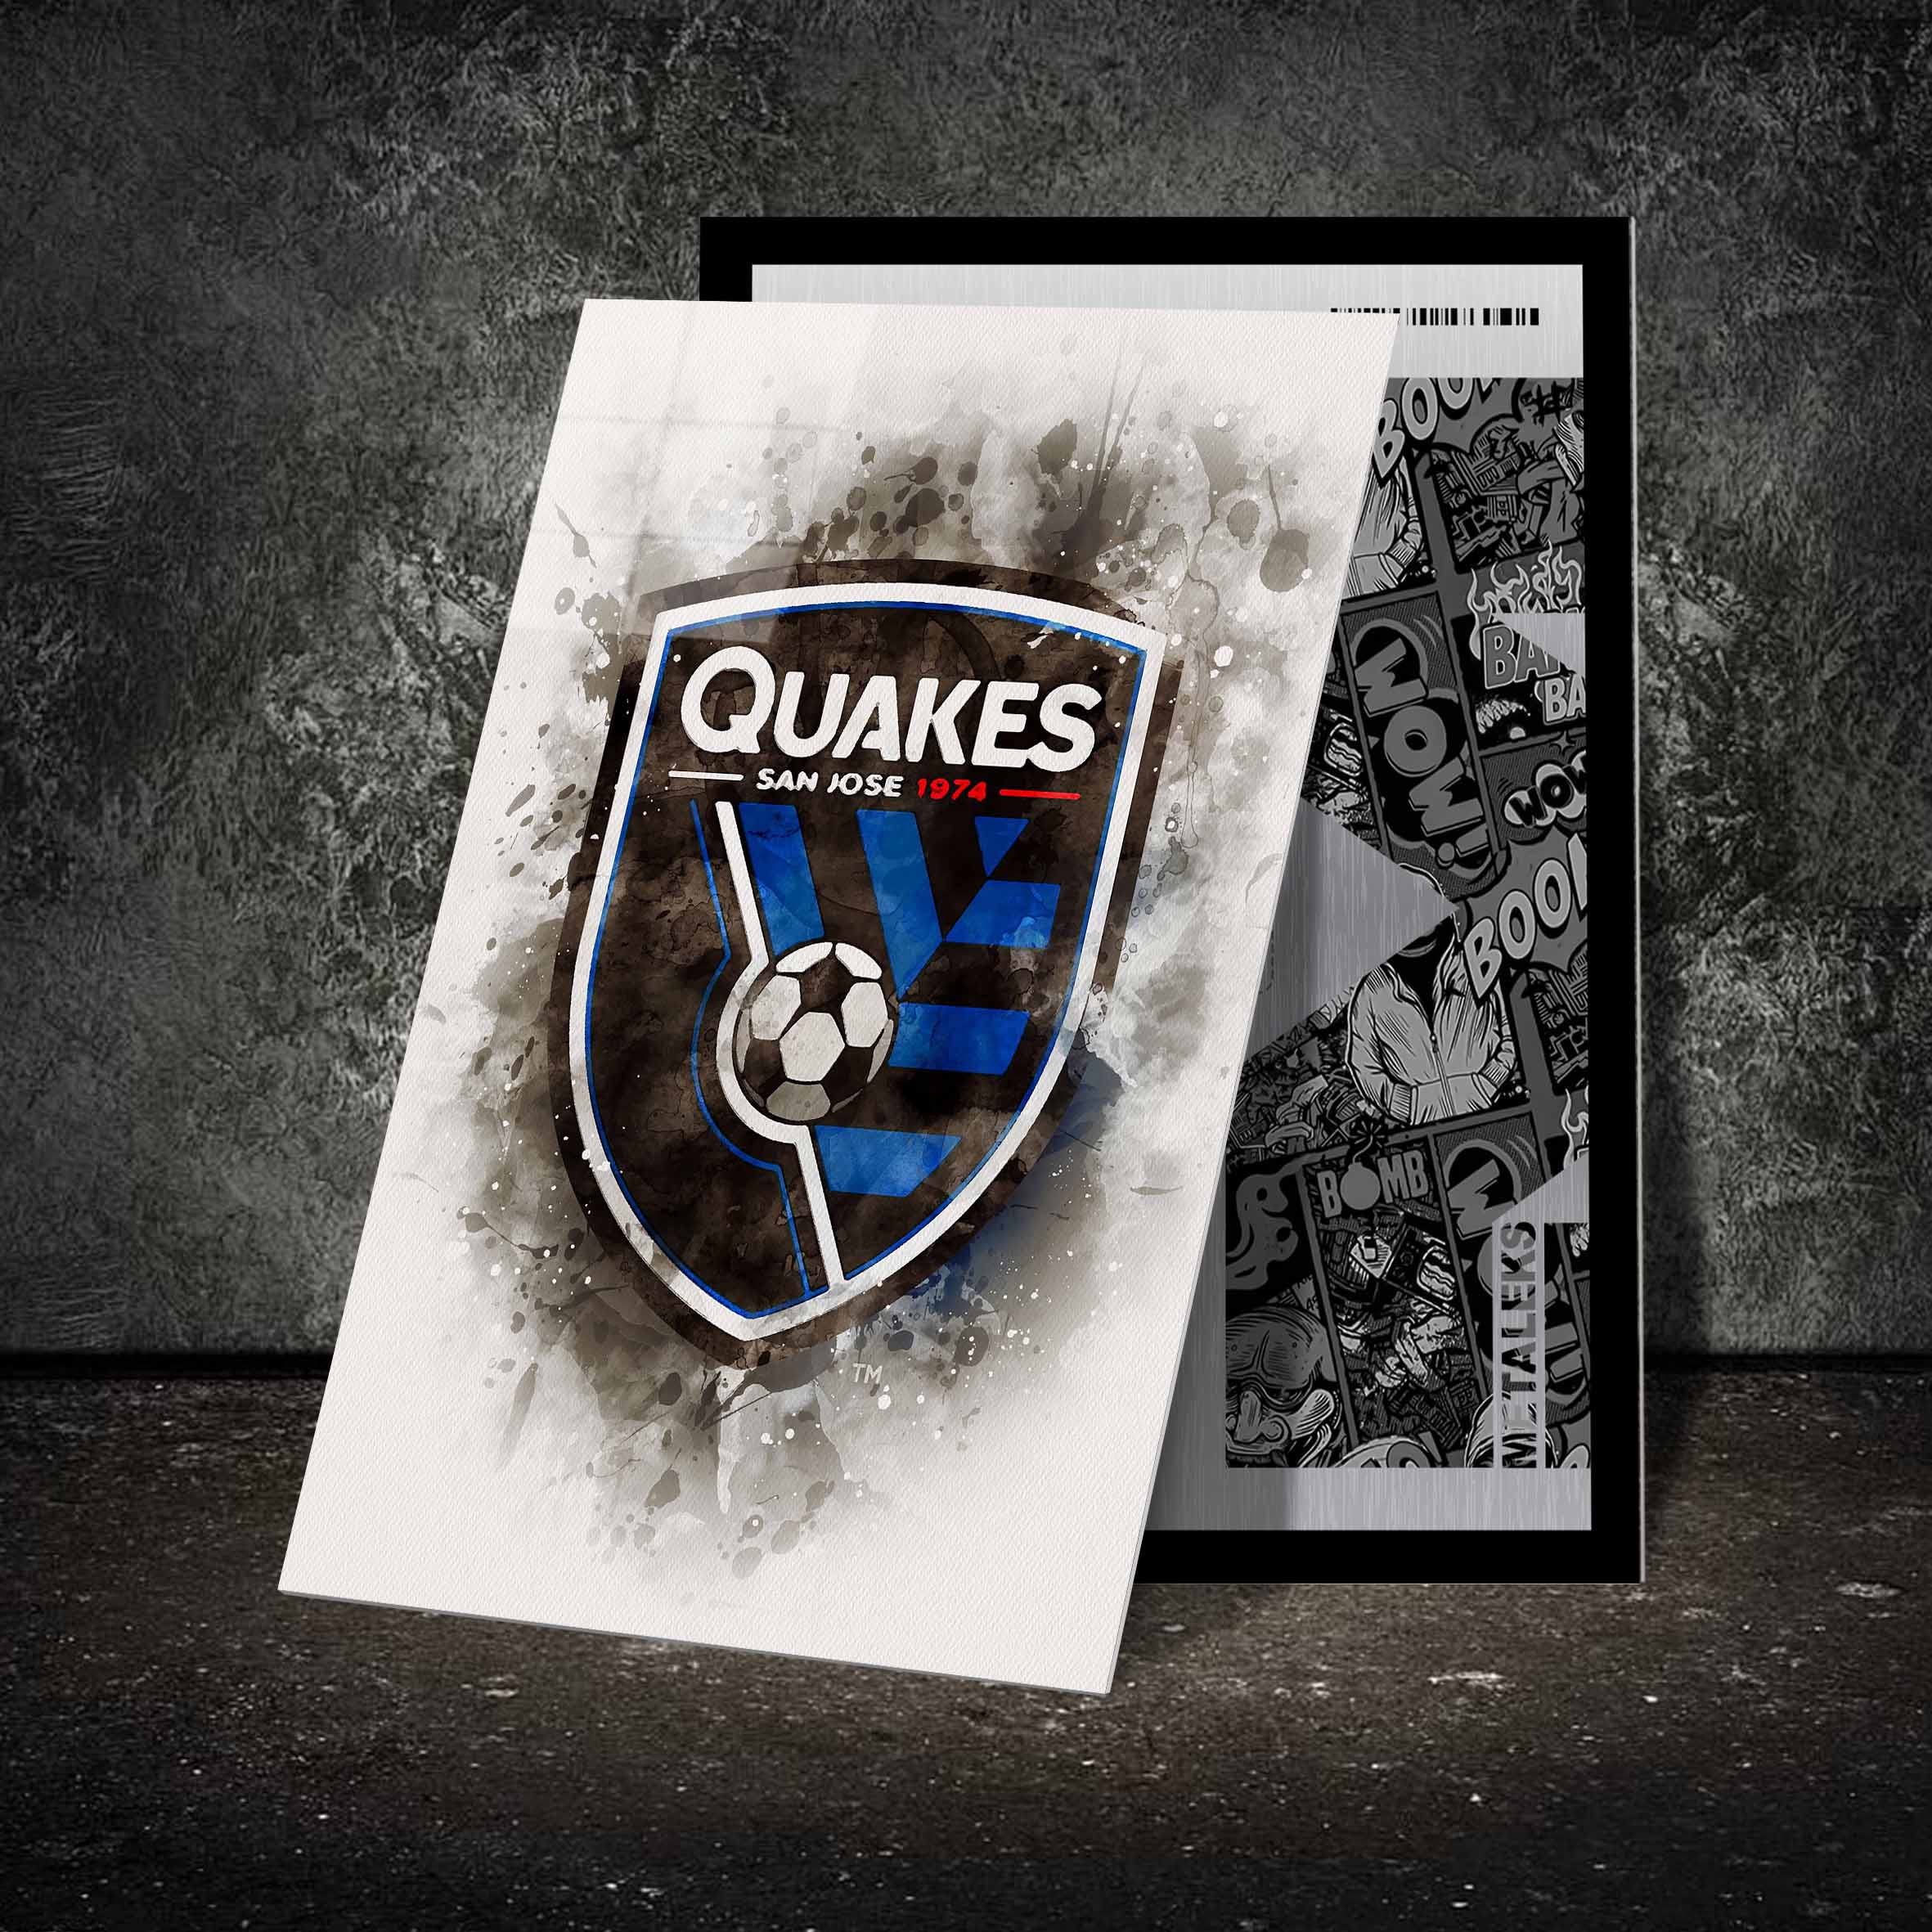 San Jose Earthquakes water color-designed by @Hoang Van Thuan